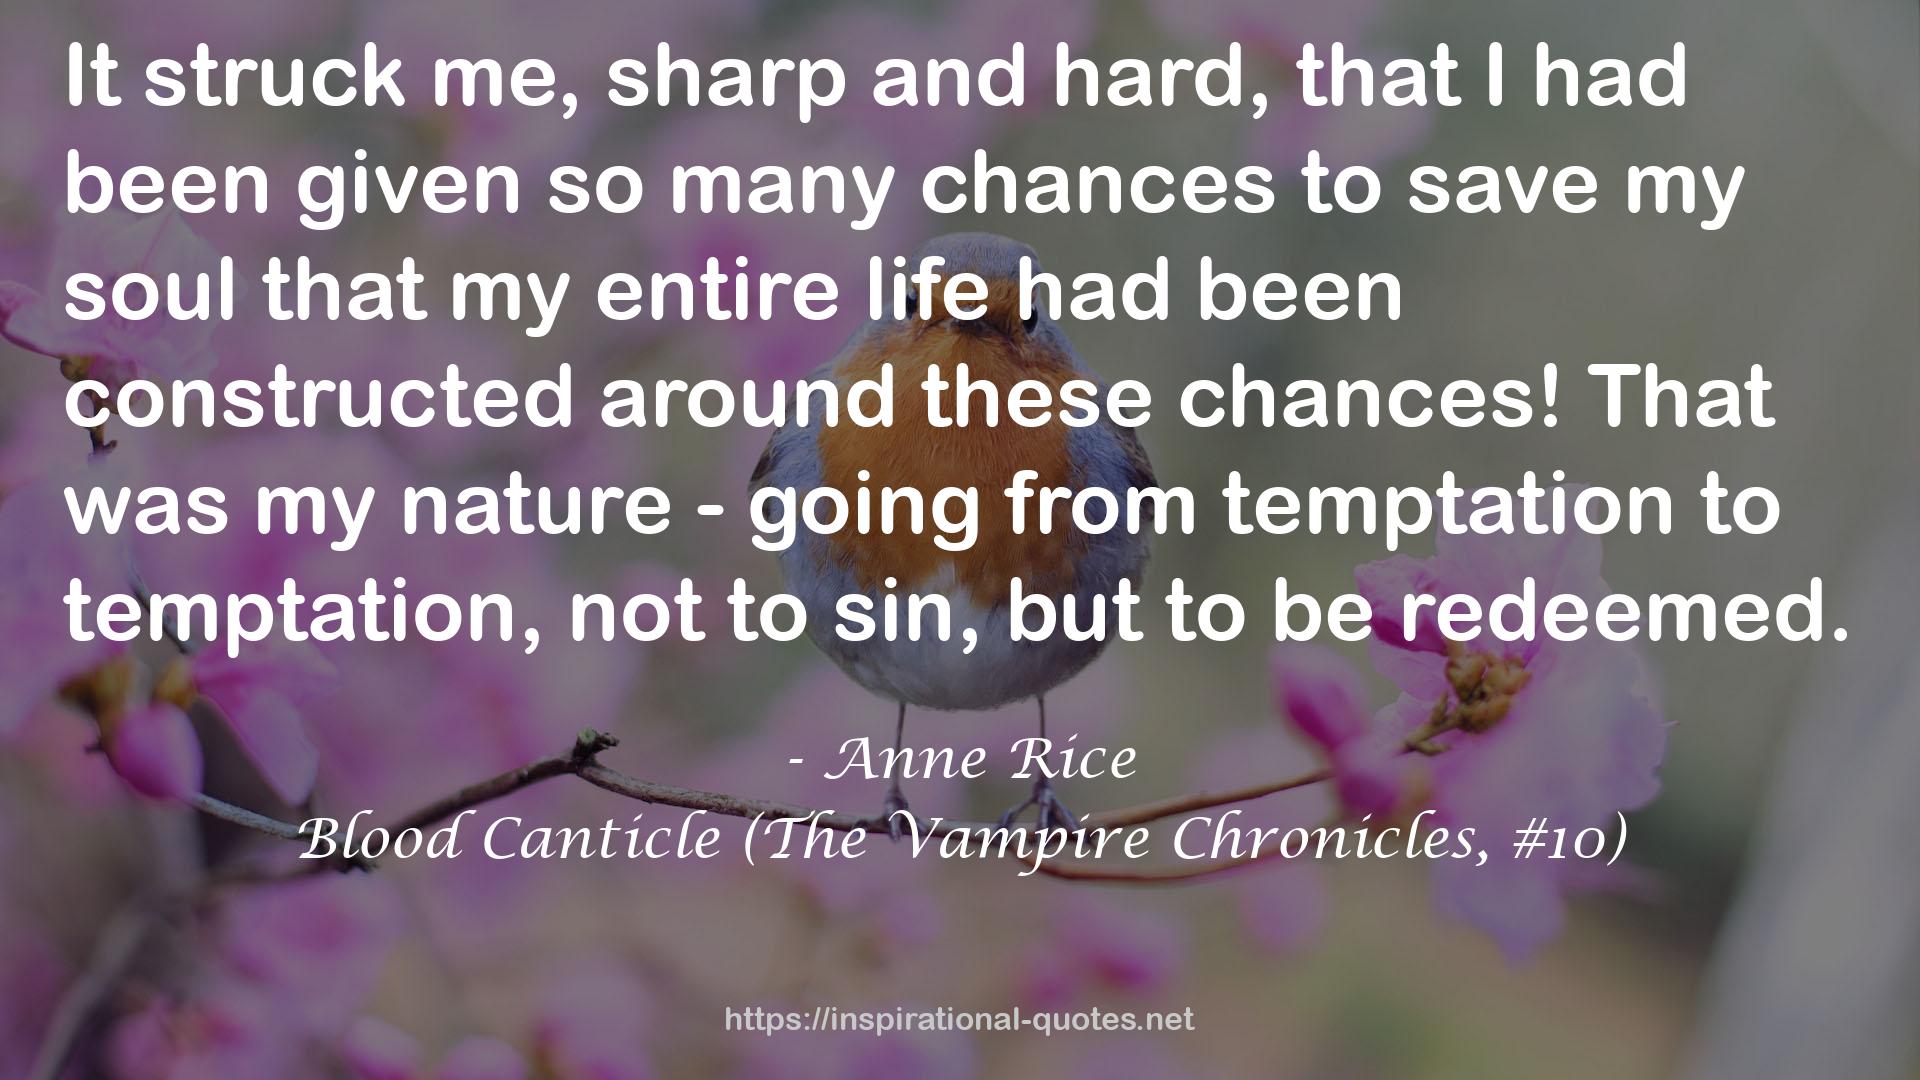 Blood Canticle (The Vampire Chronicles, #10) QUOTES